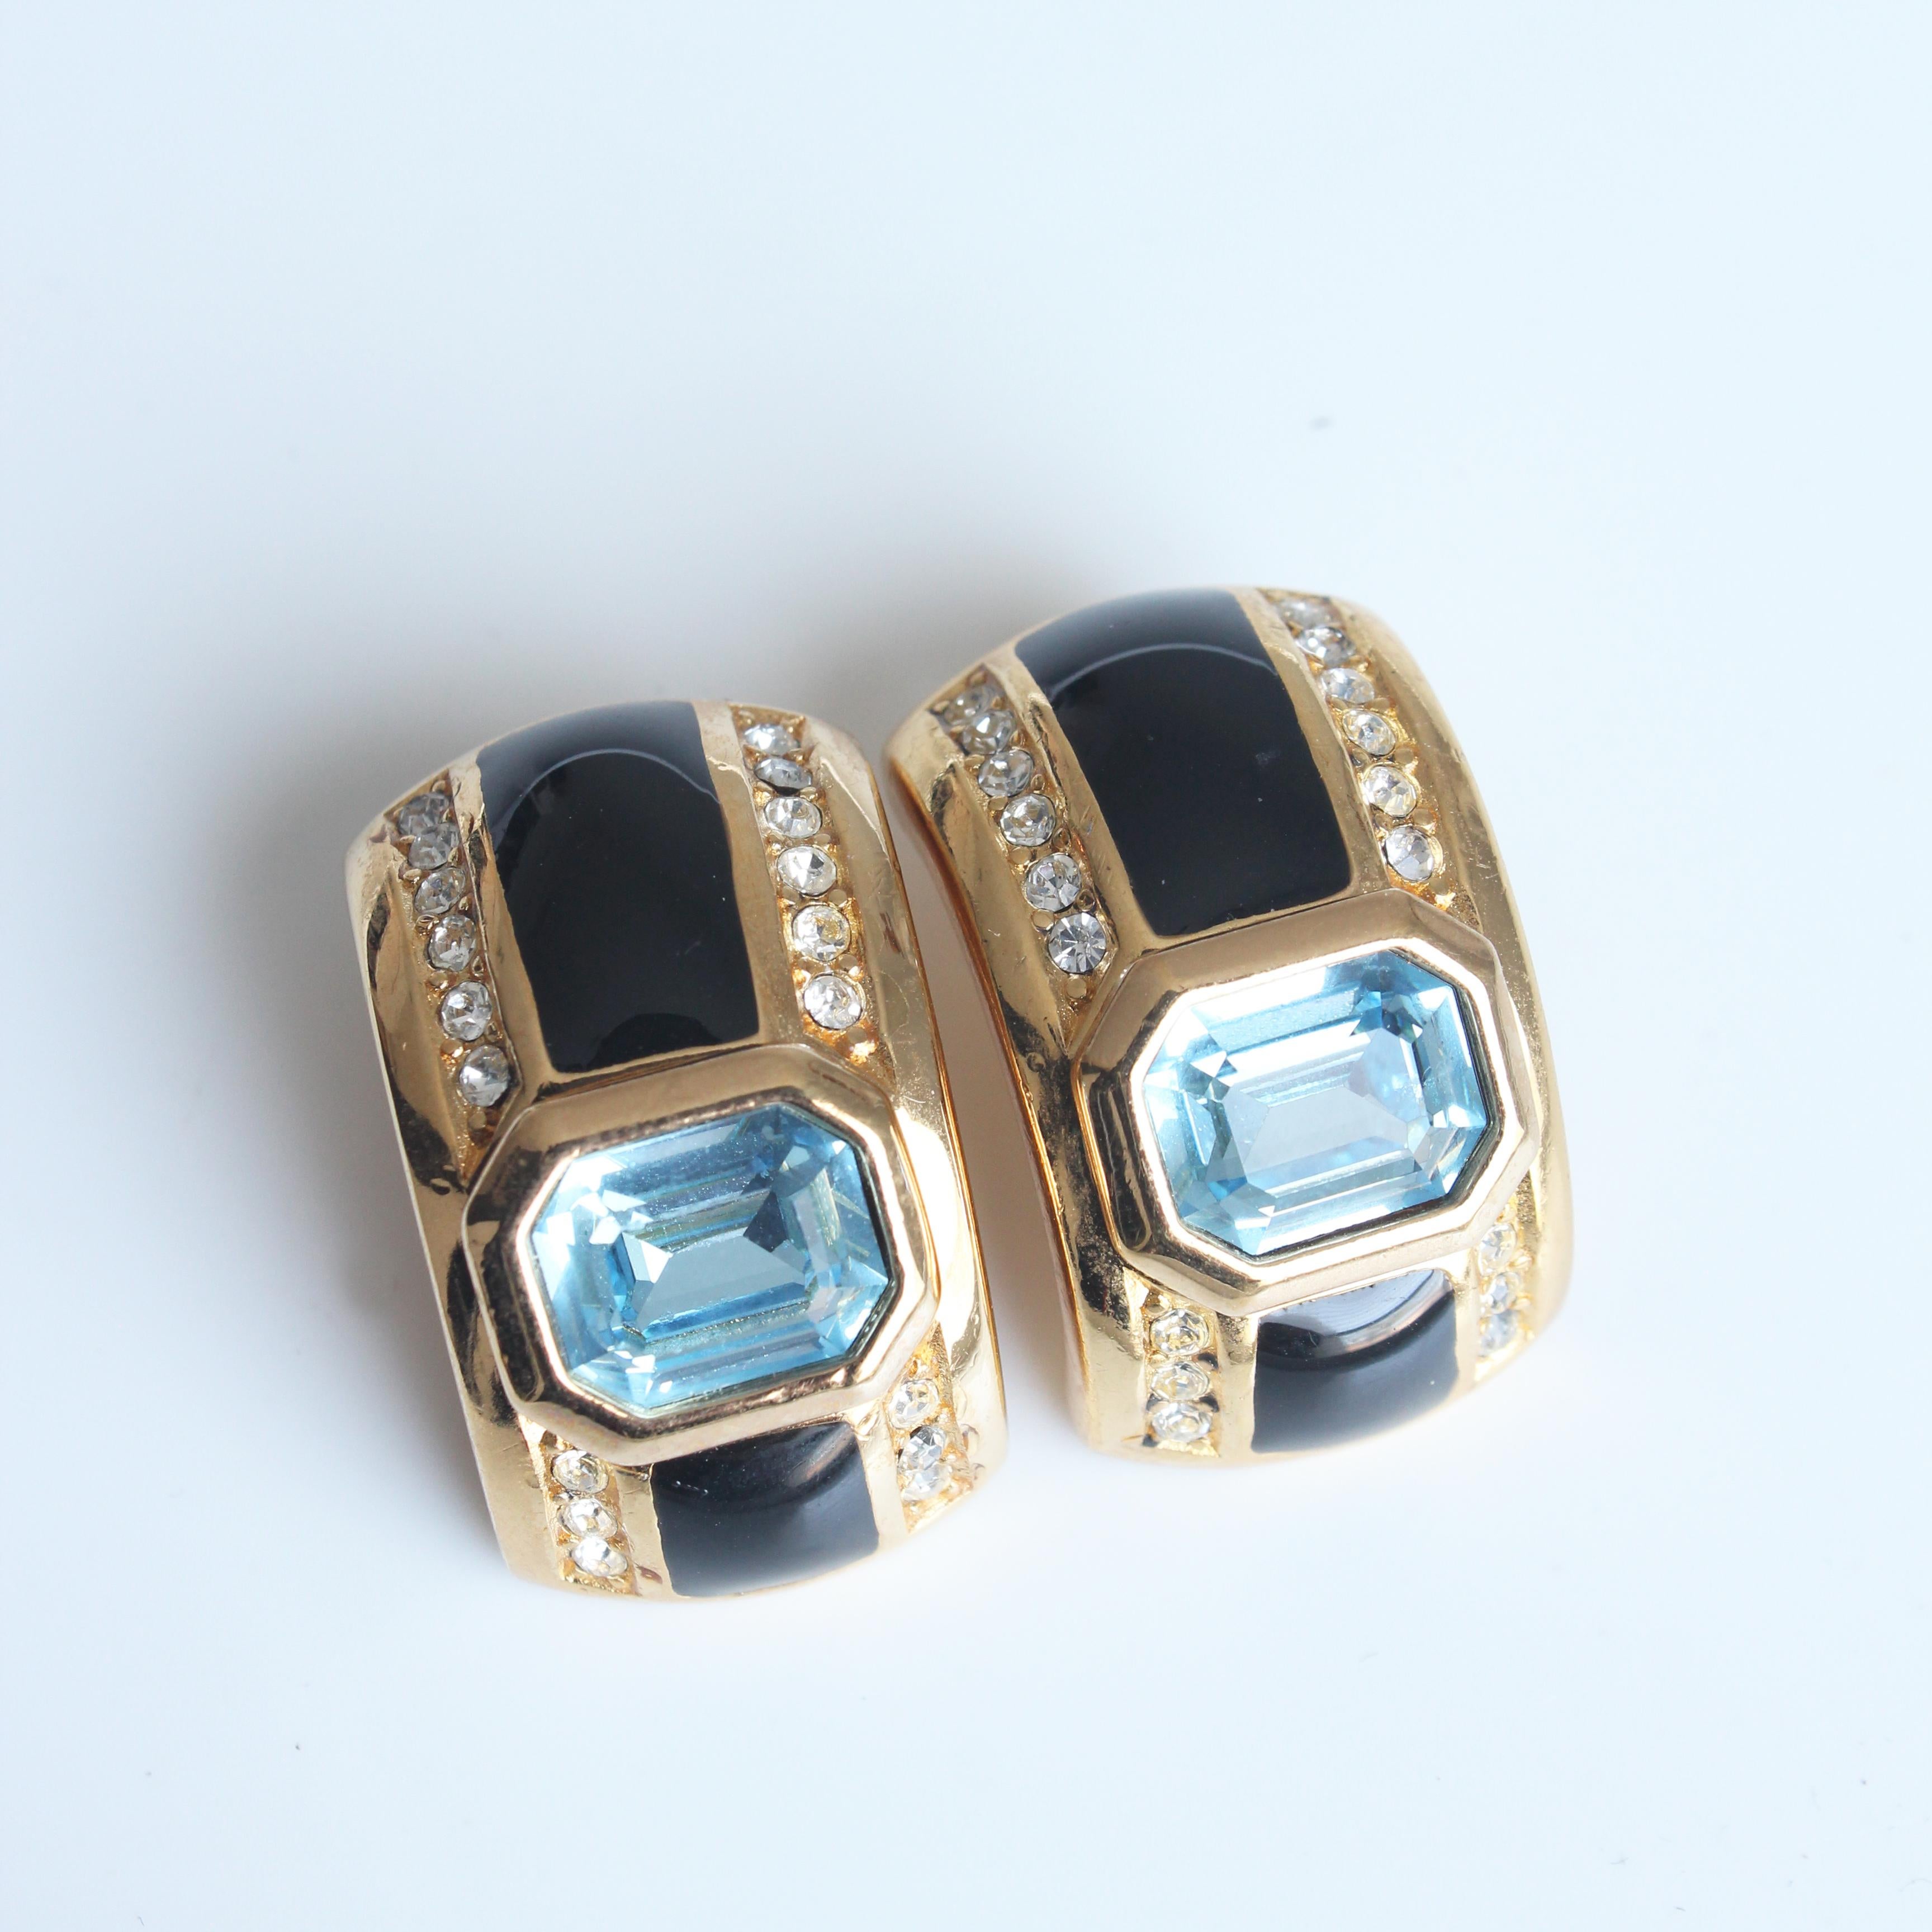 Christian Dior Art Deco Earrings with Faux Sapphire Topaz Crystals 1980s For Sale 11